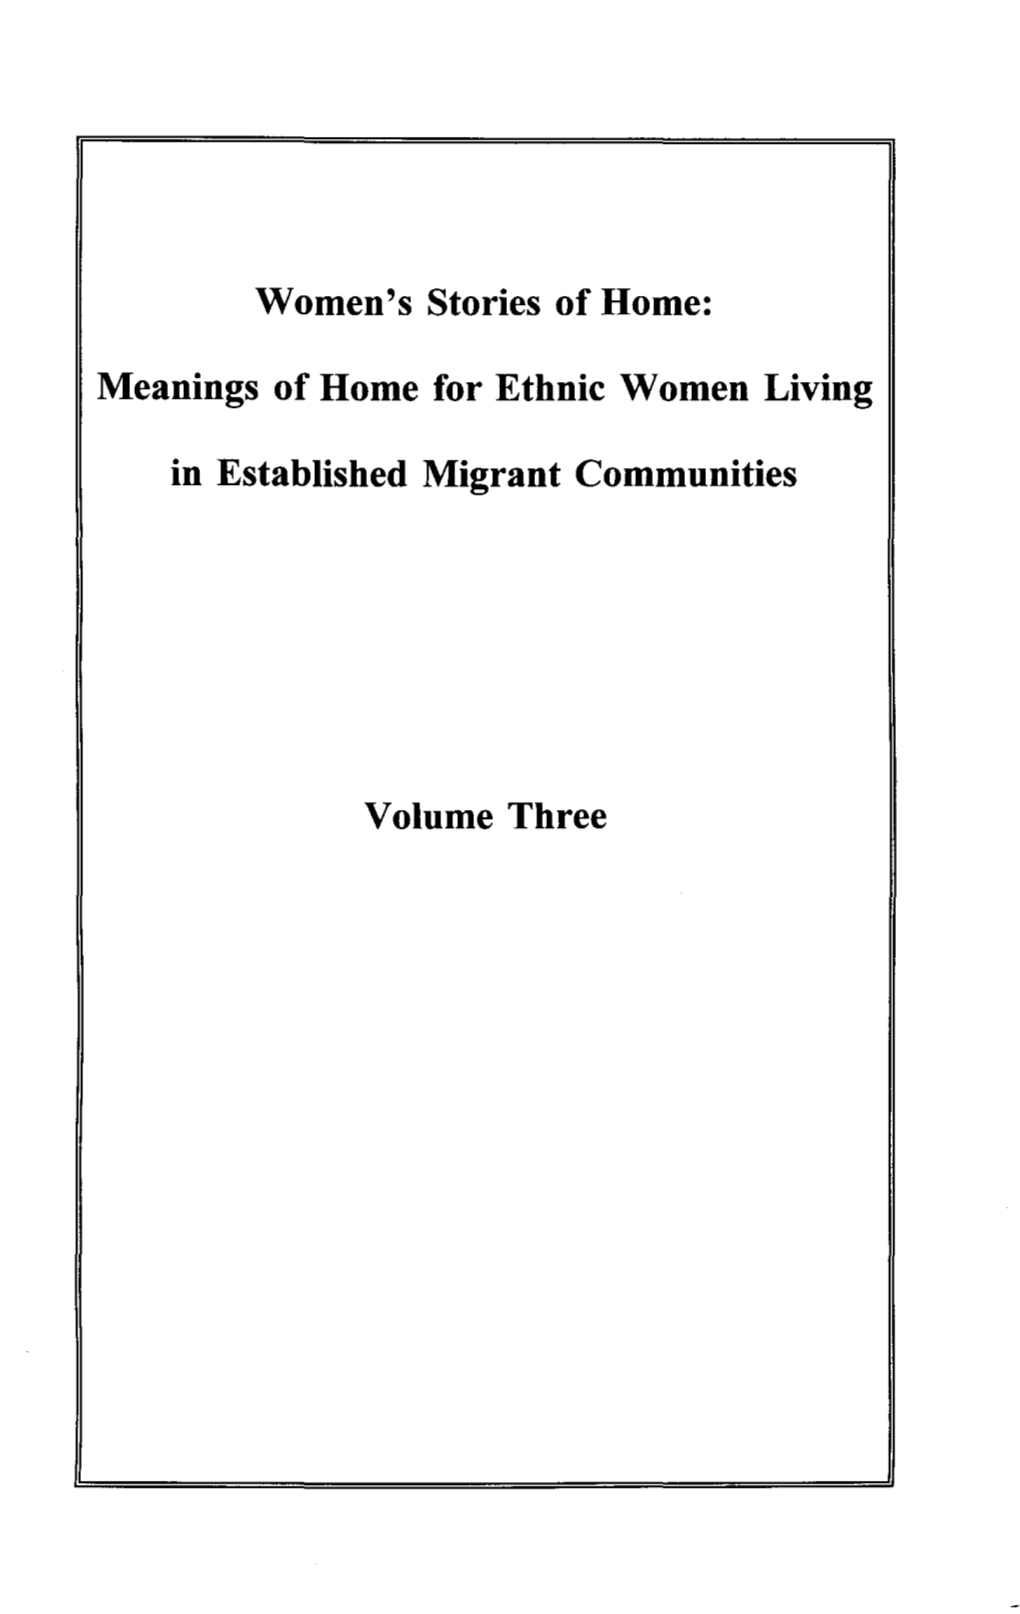 Women's Stories of Home: Meanings of Home for Ethnic Women Living In